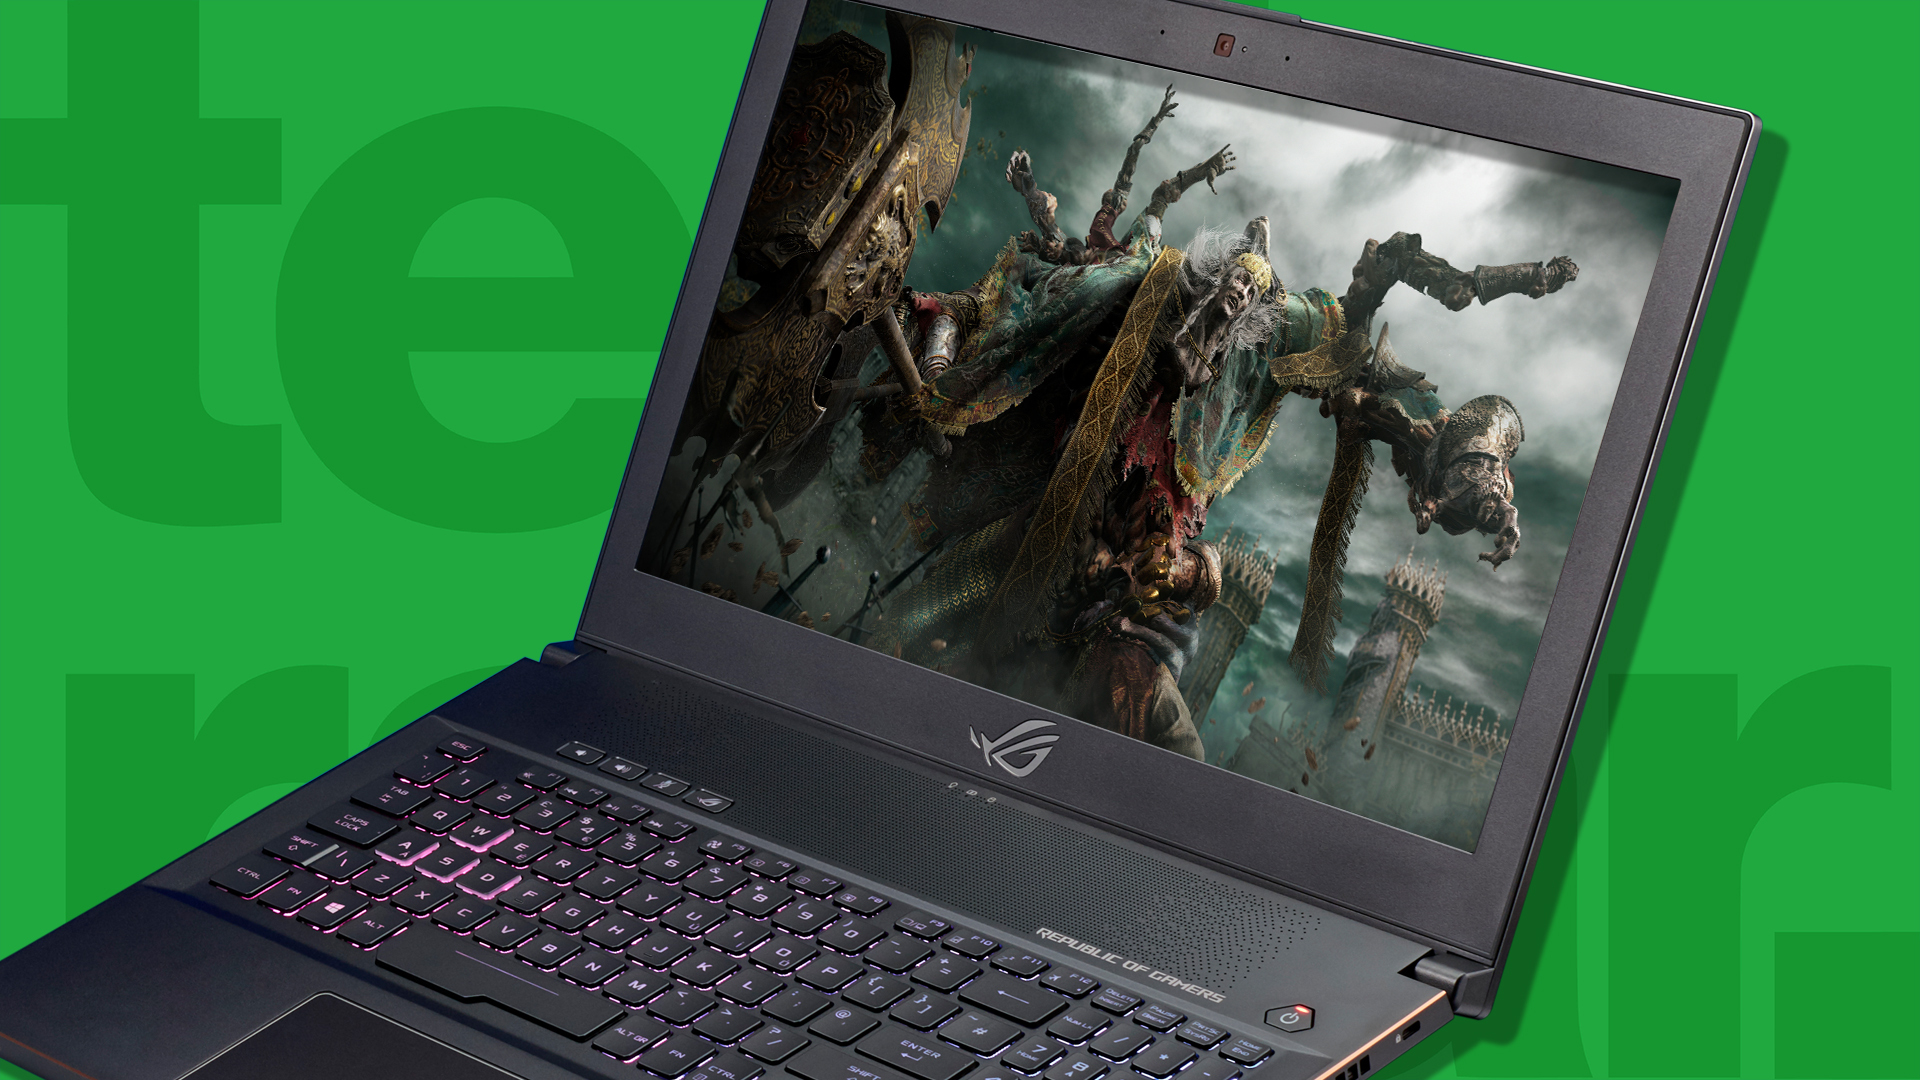 Elden Ring played on Asus ROG gaming laptop against green background